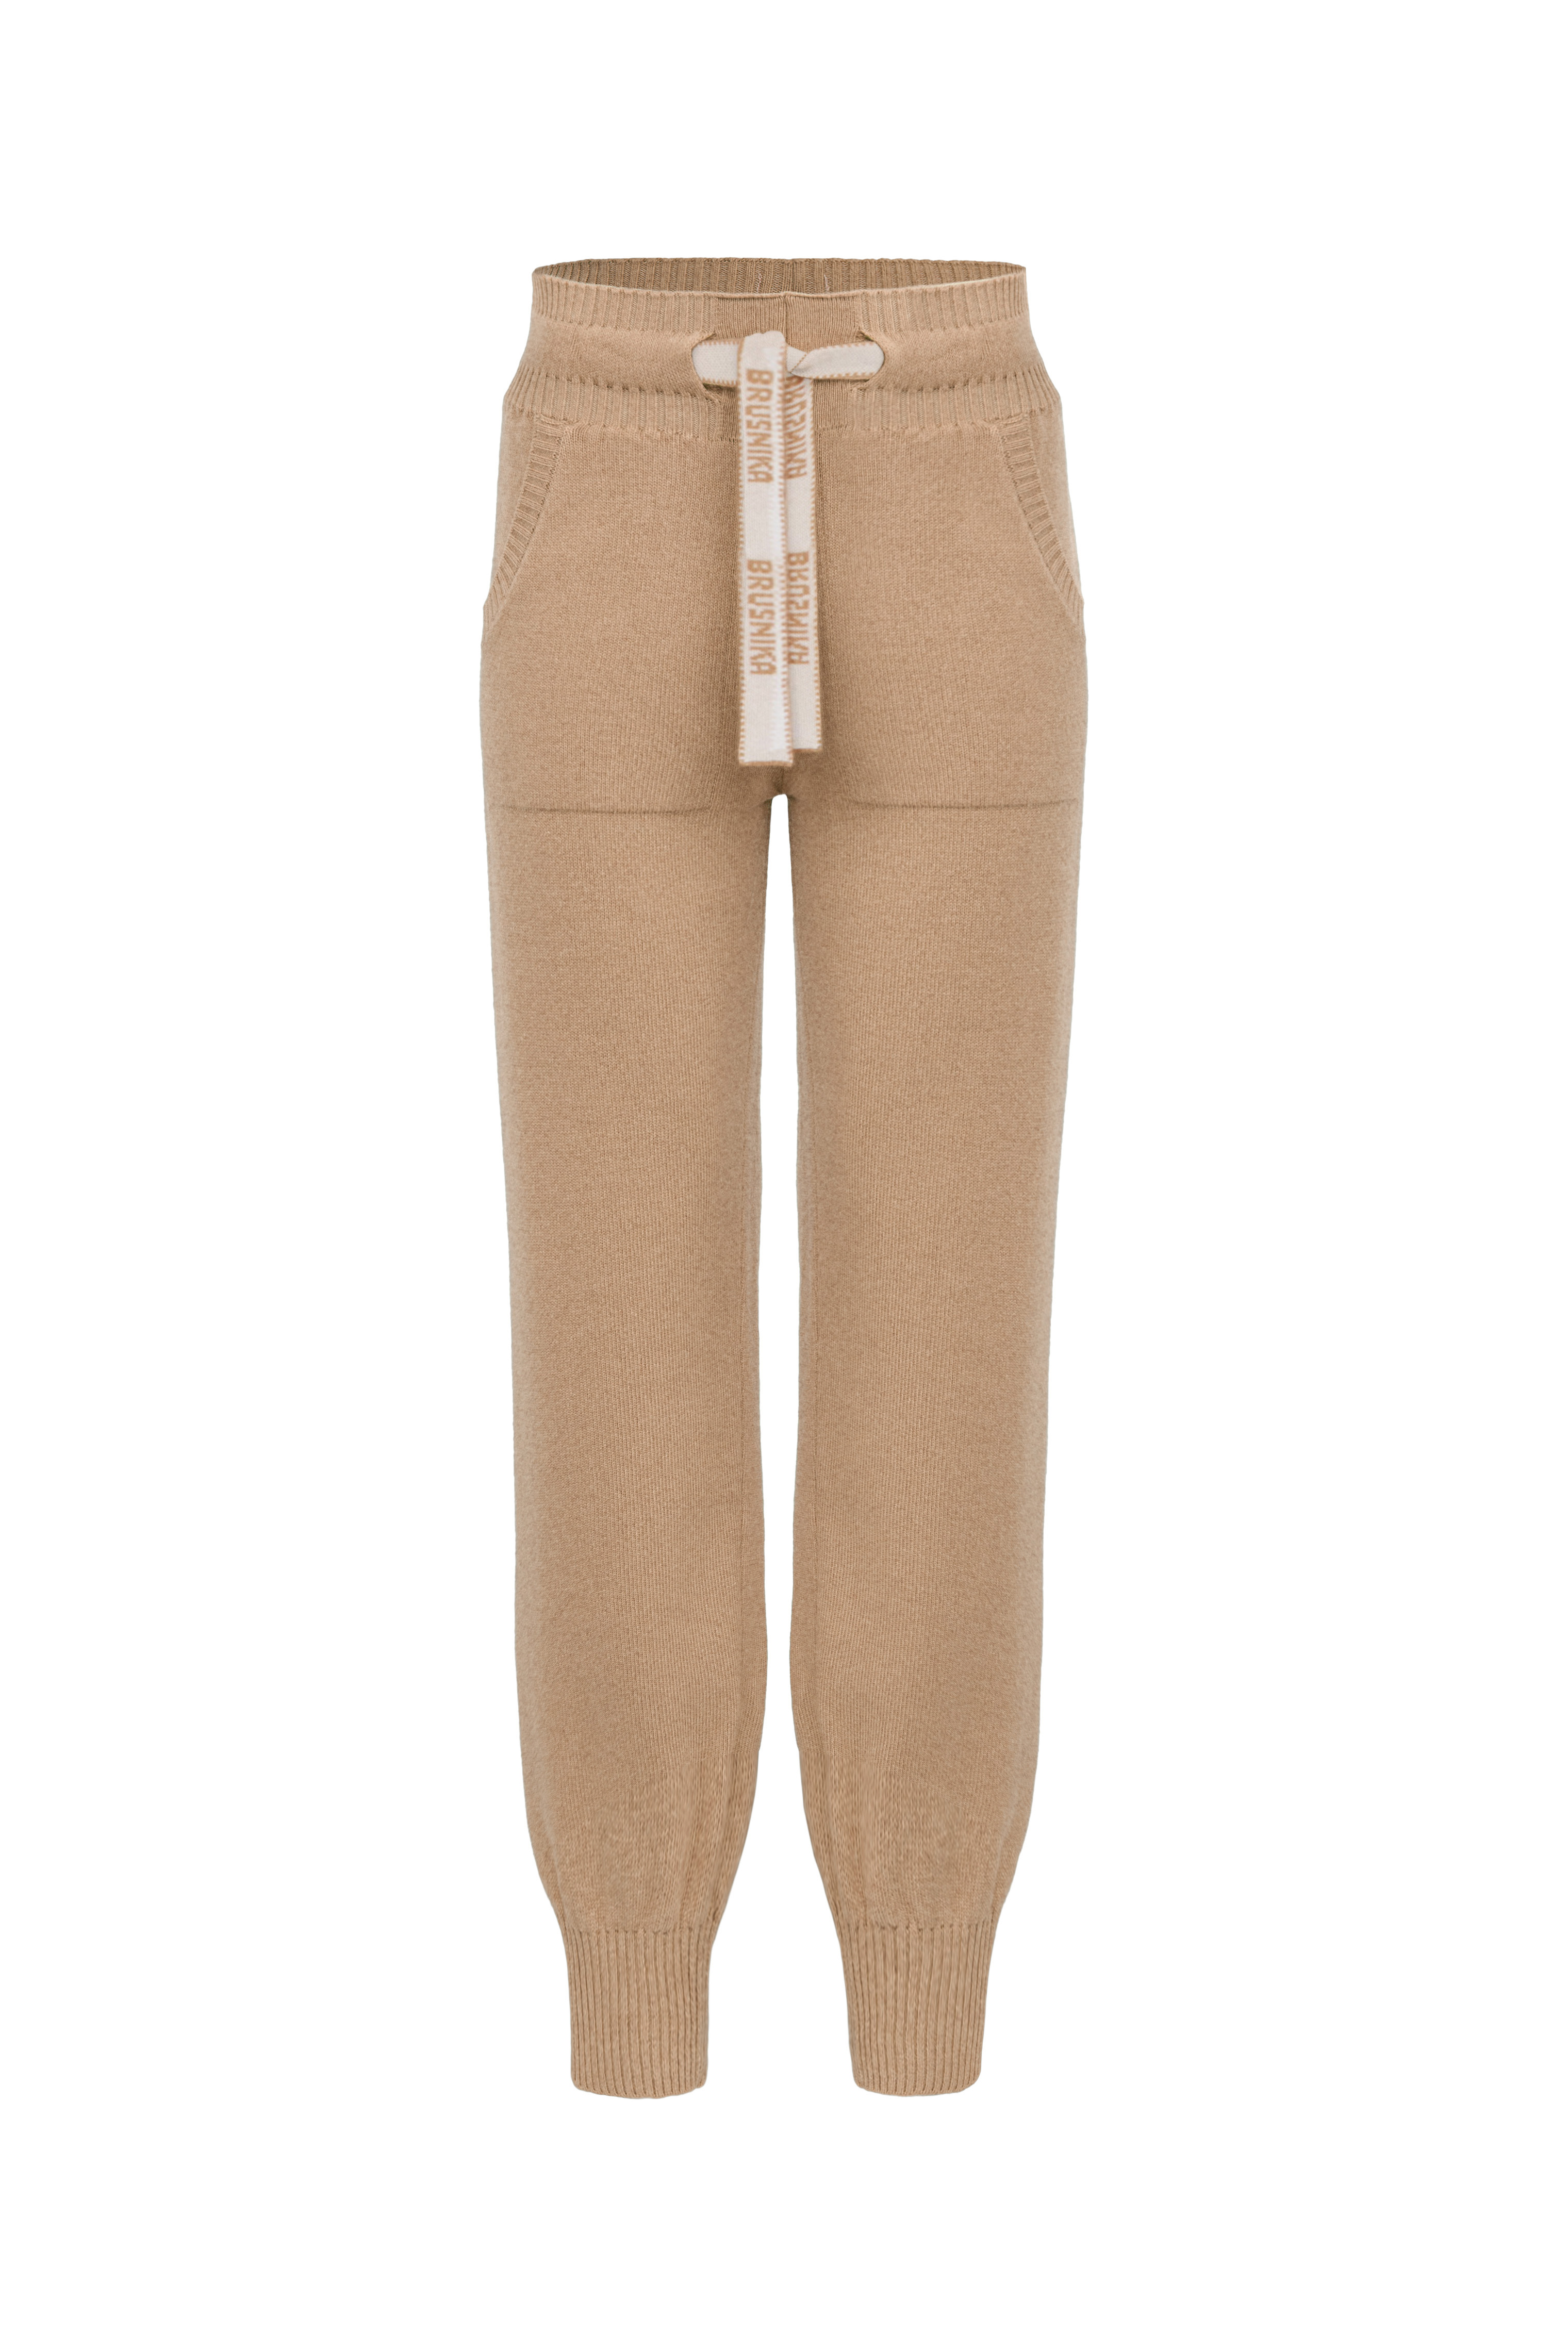 Trousers 3652-128 Camel from BRUSNiKA